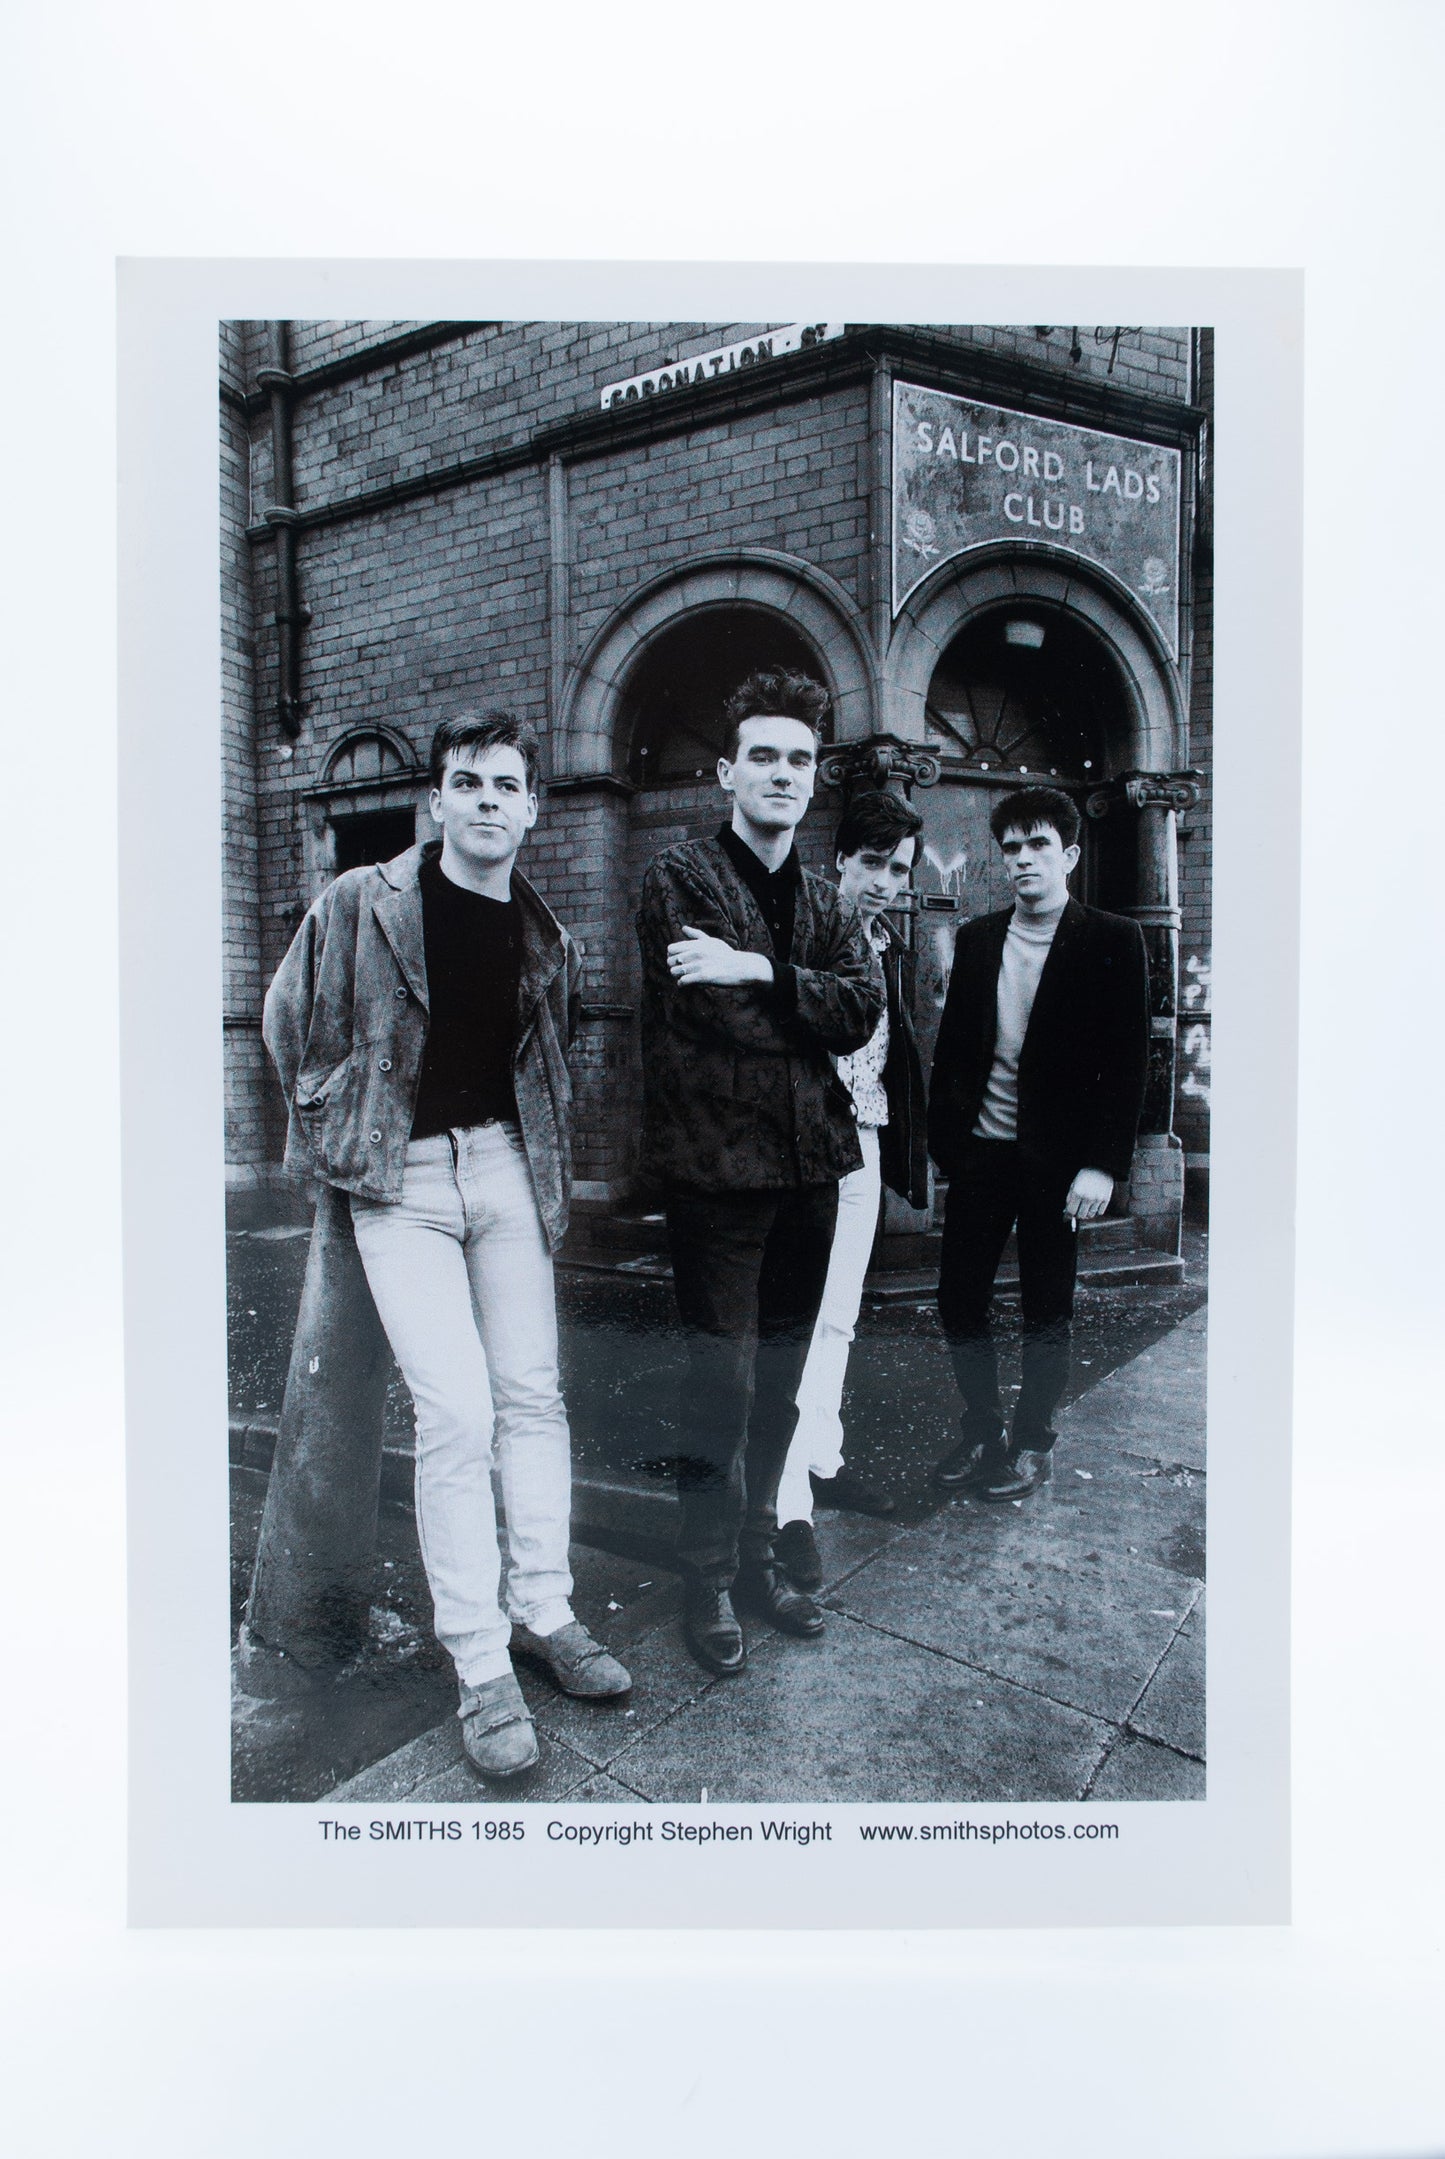 Photograph of the Smiths at the Salford Lads Club